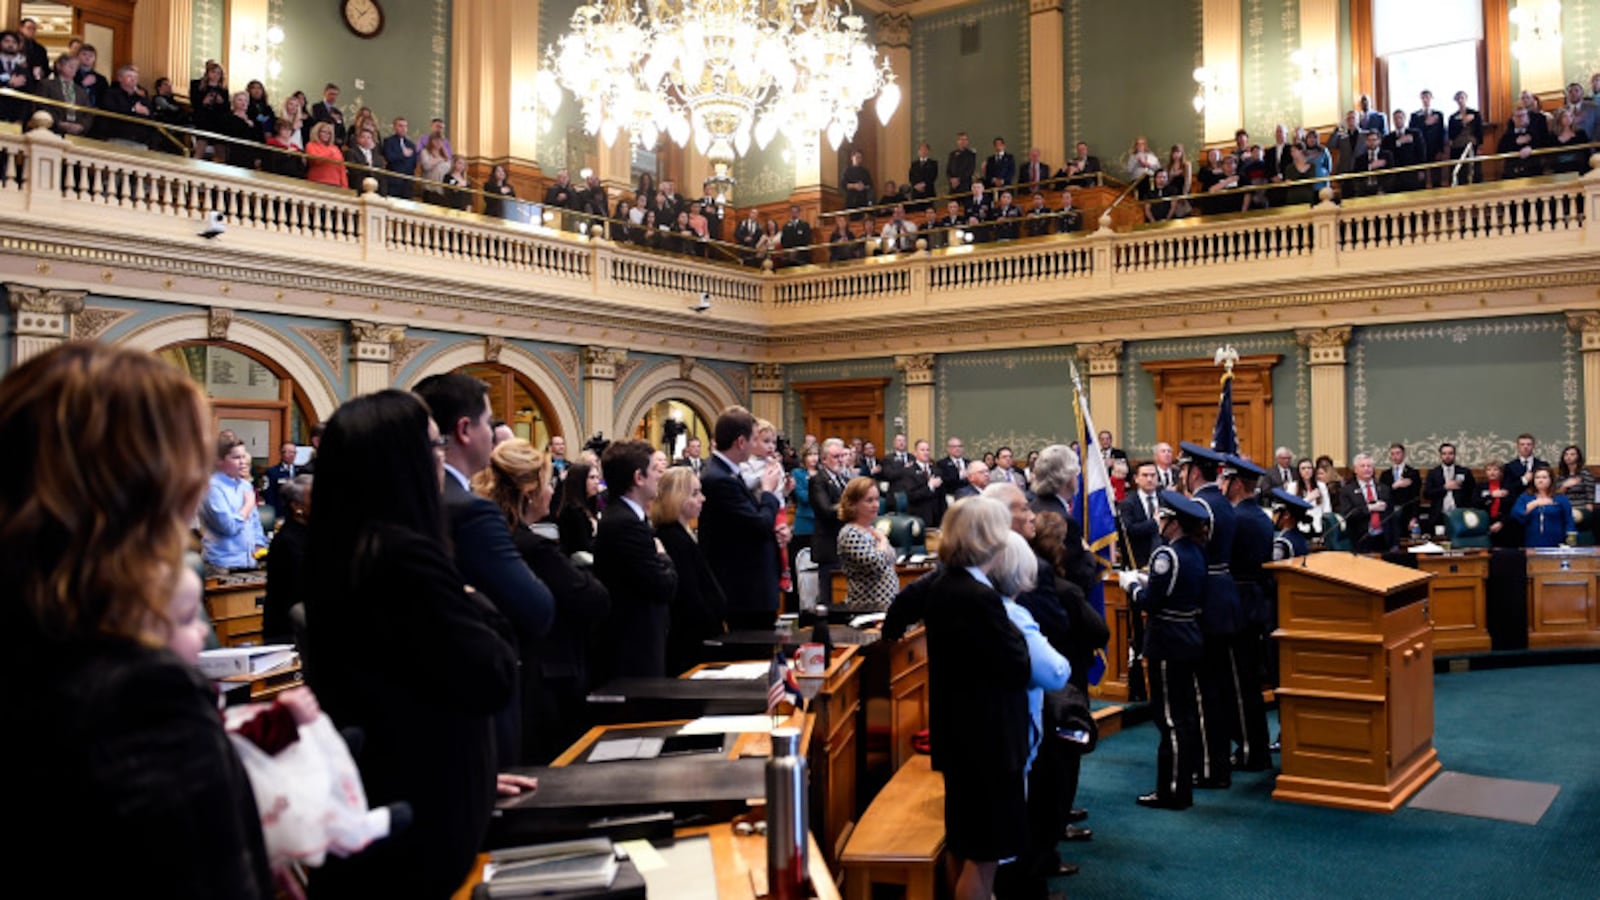 DENVER, CO - January 10: The Pledge of Allegiance in the House of Representatives on opening day of the second session of the 71st General Assembly at the Colorado State Capitol. January 10, 2018 in Denver, Colorado. (Photo by Joe Amon/The Denver Post)